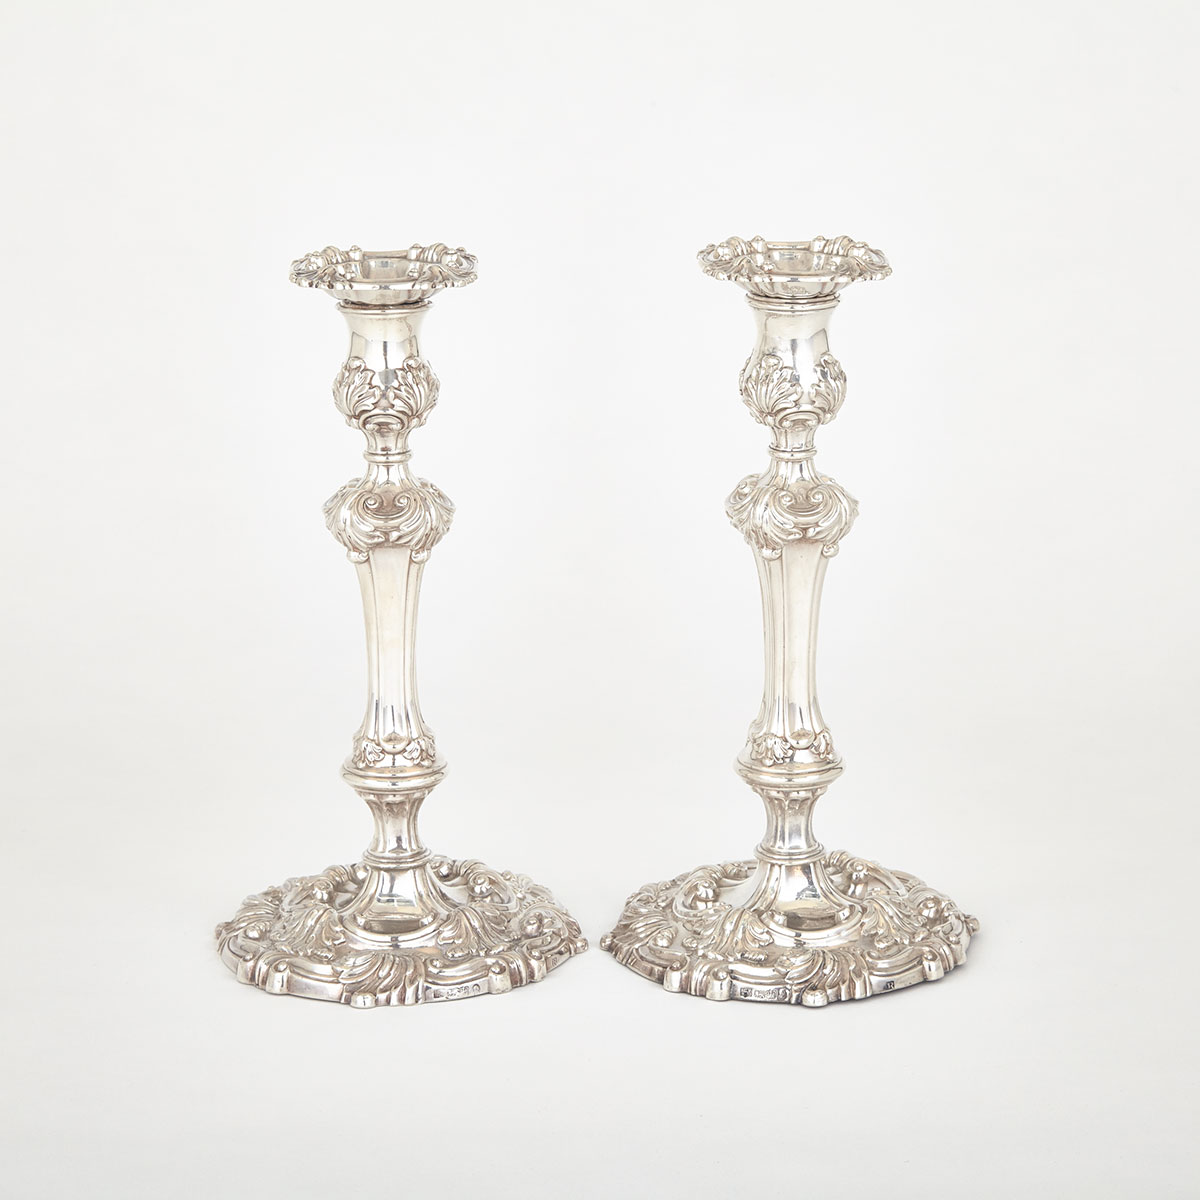 Pair of George III Silver Table Candlesticks, S.C. Younge & Co., Sheffield, 1813